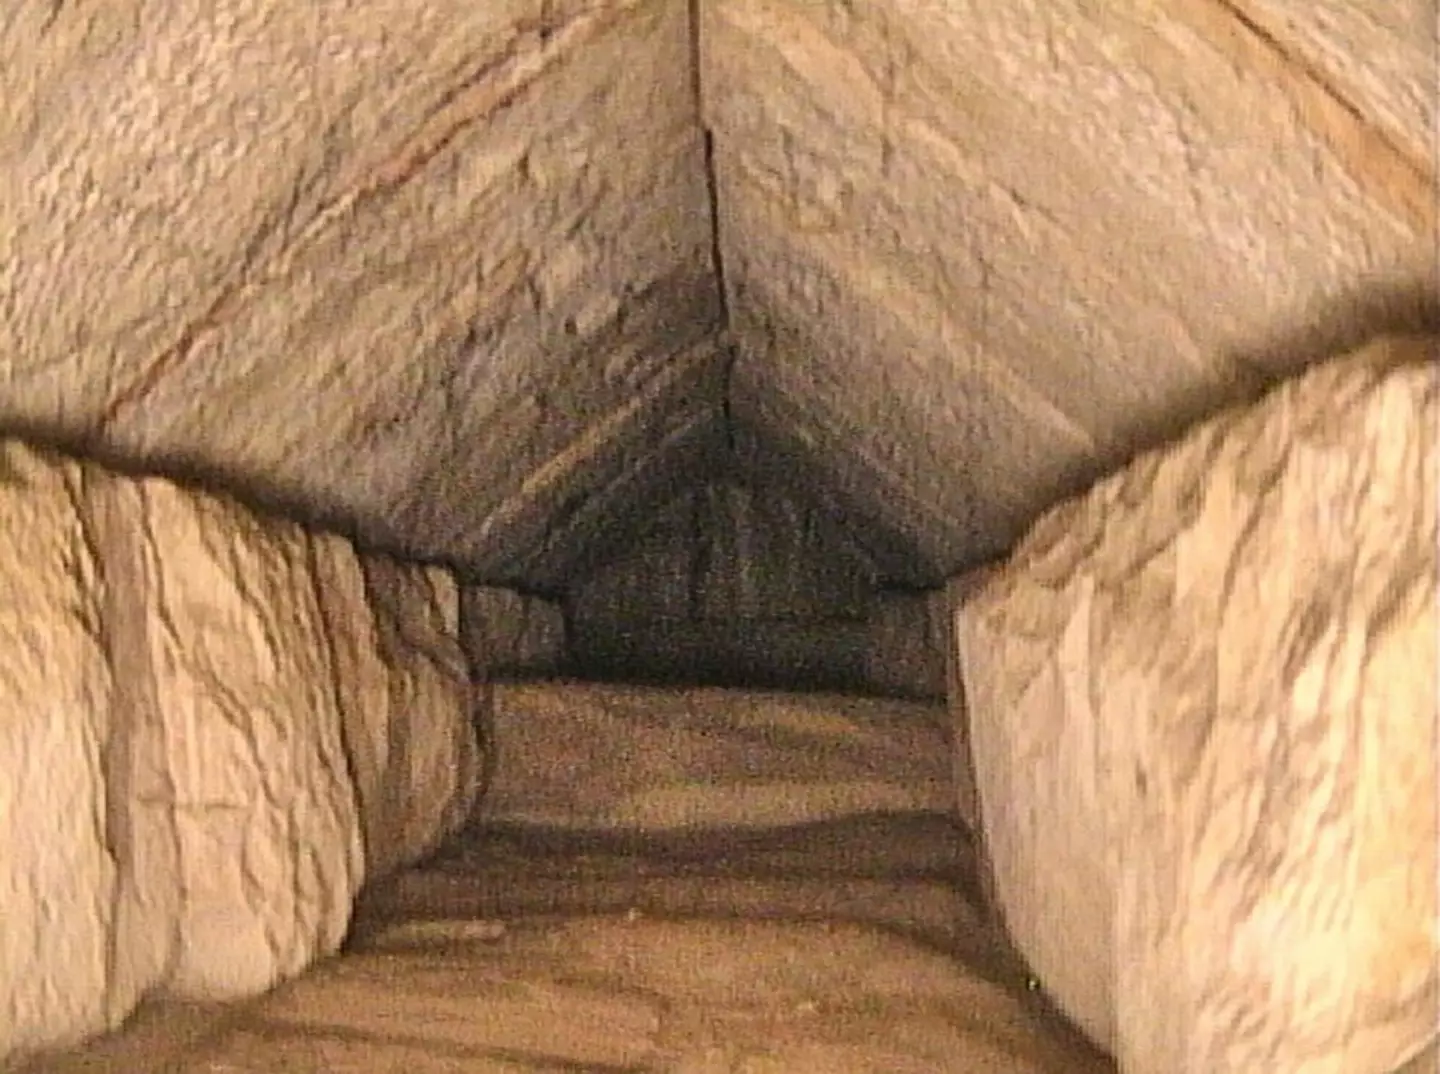 The hidden tunnel that has been discovered in the Pyramid of Khufu.